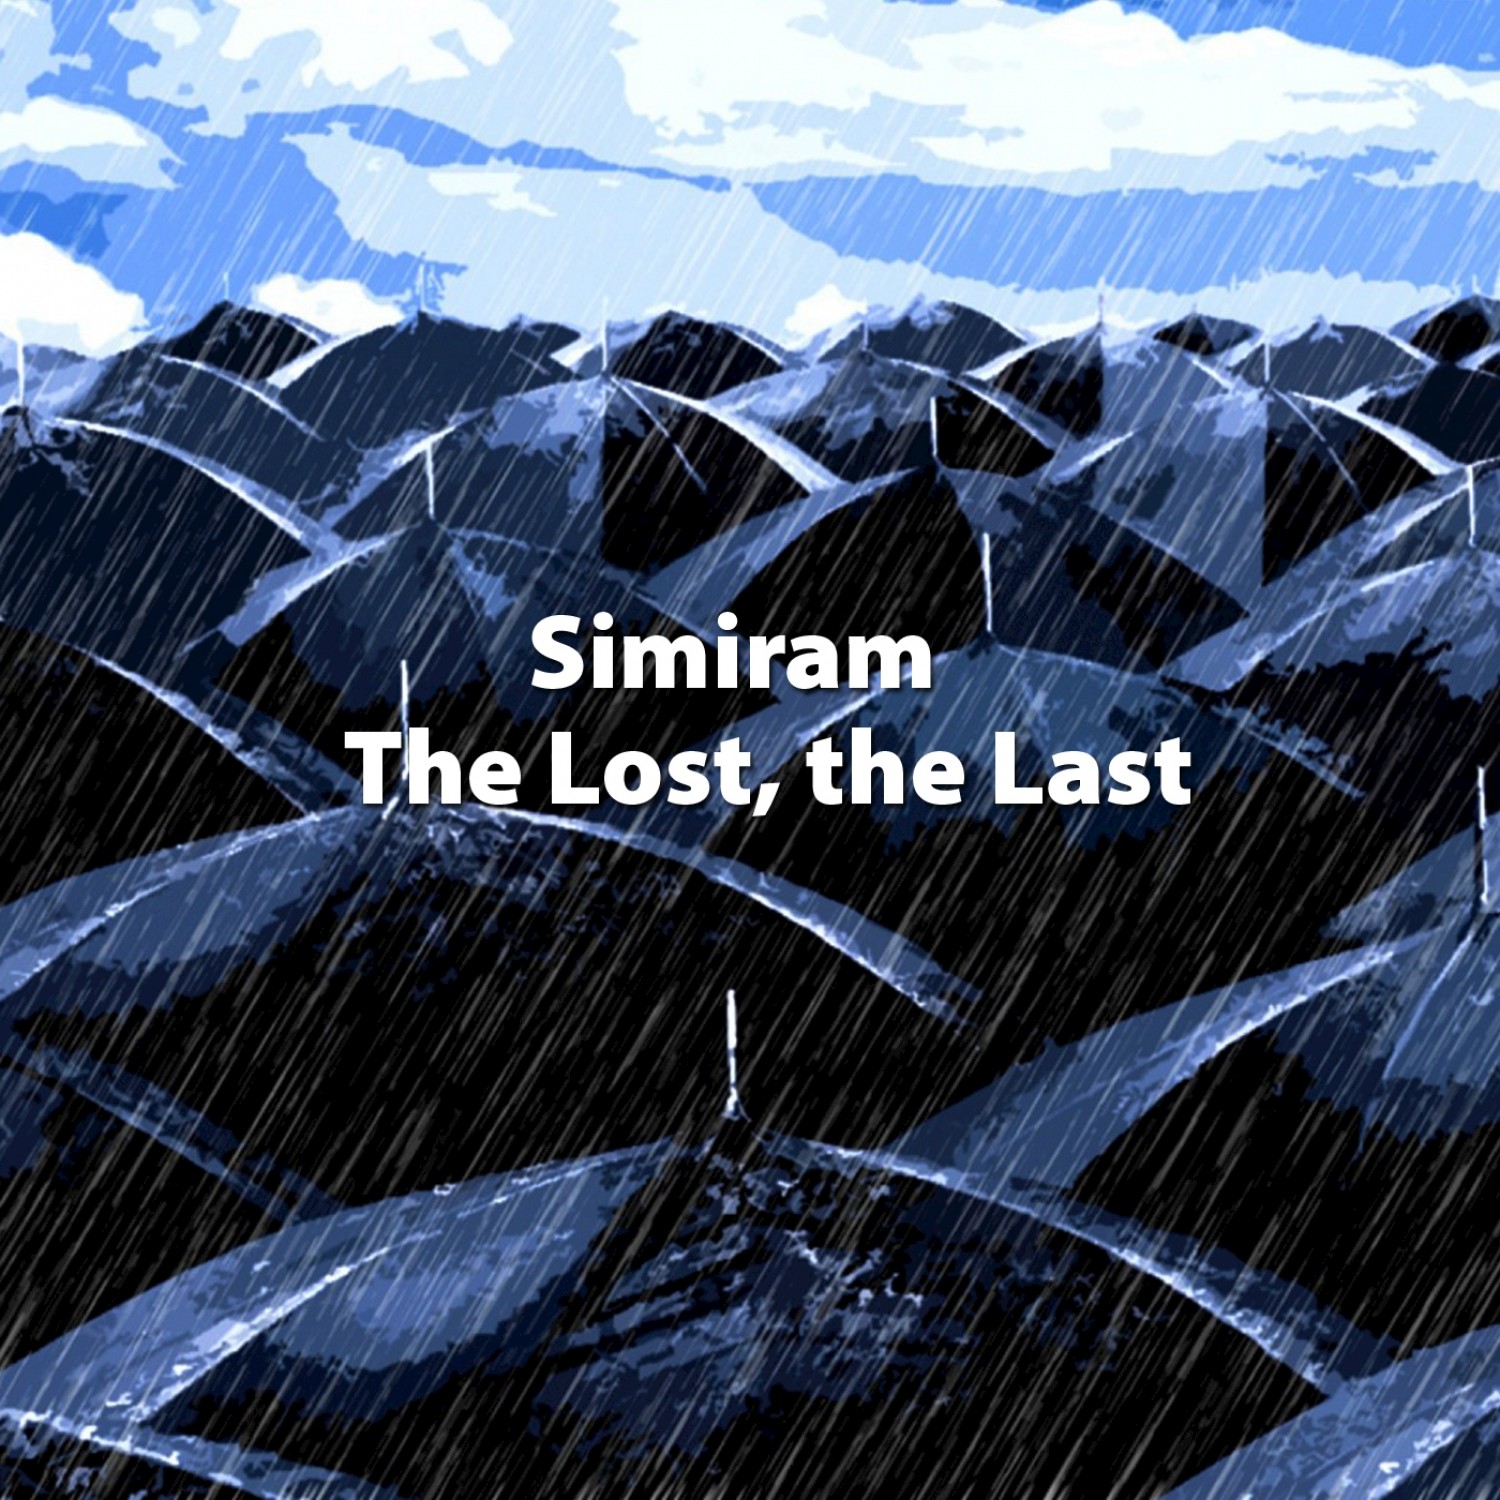 The Lost, the Last